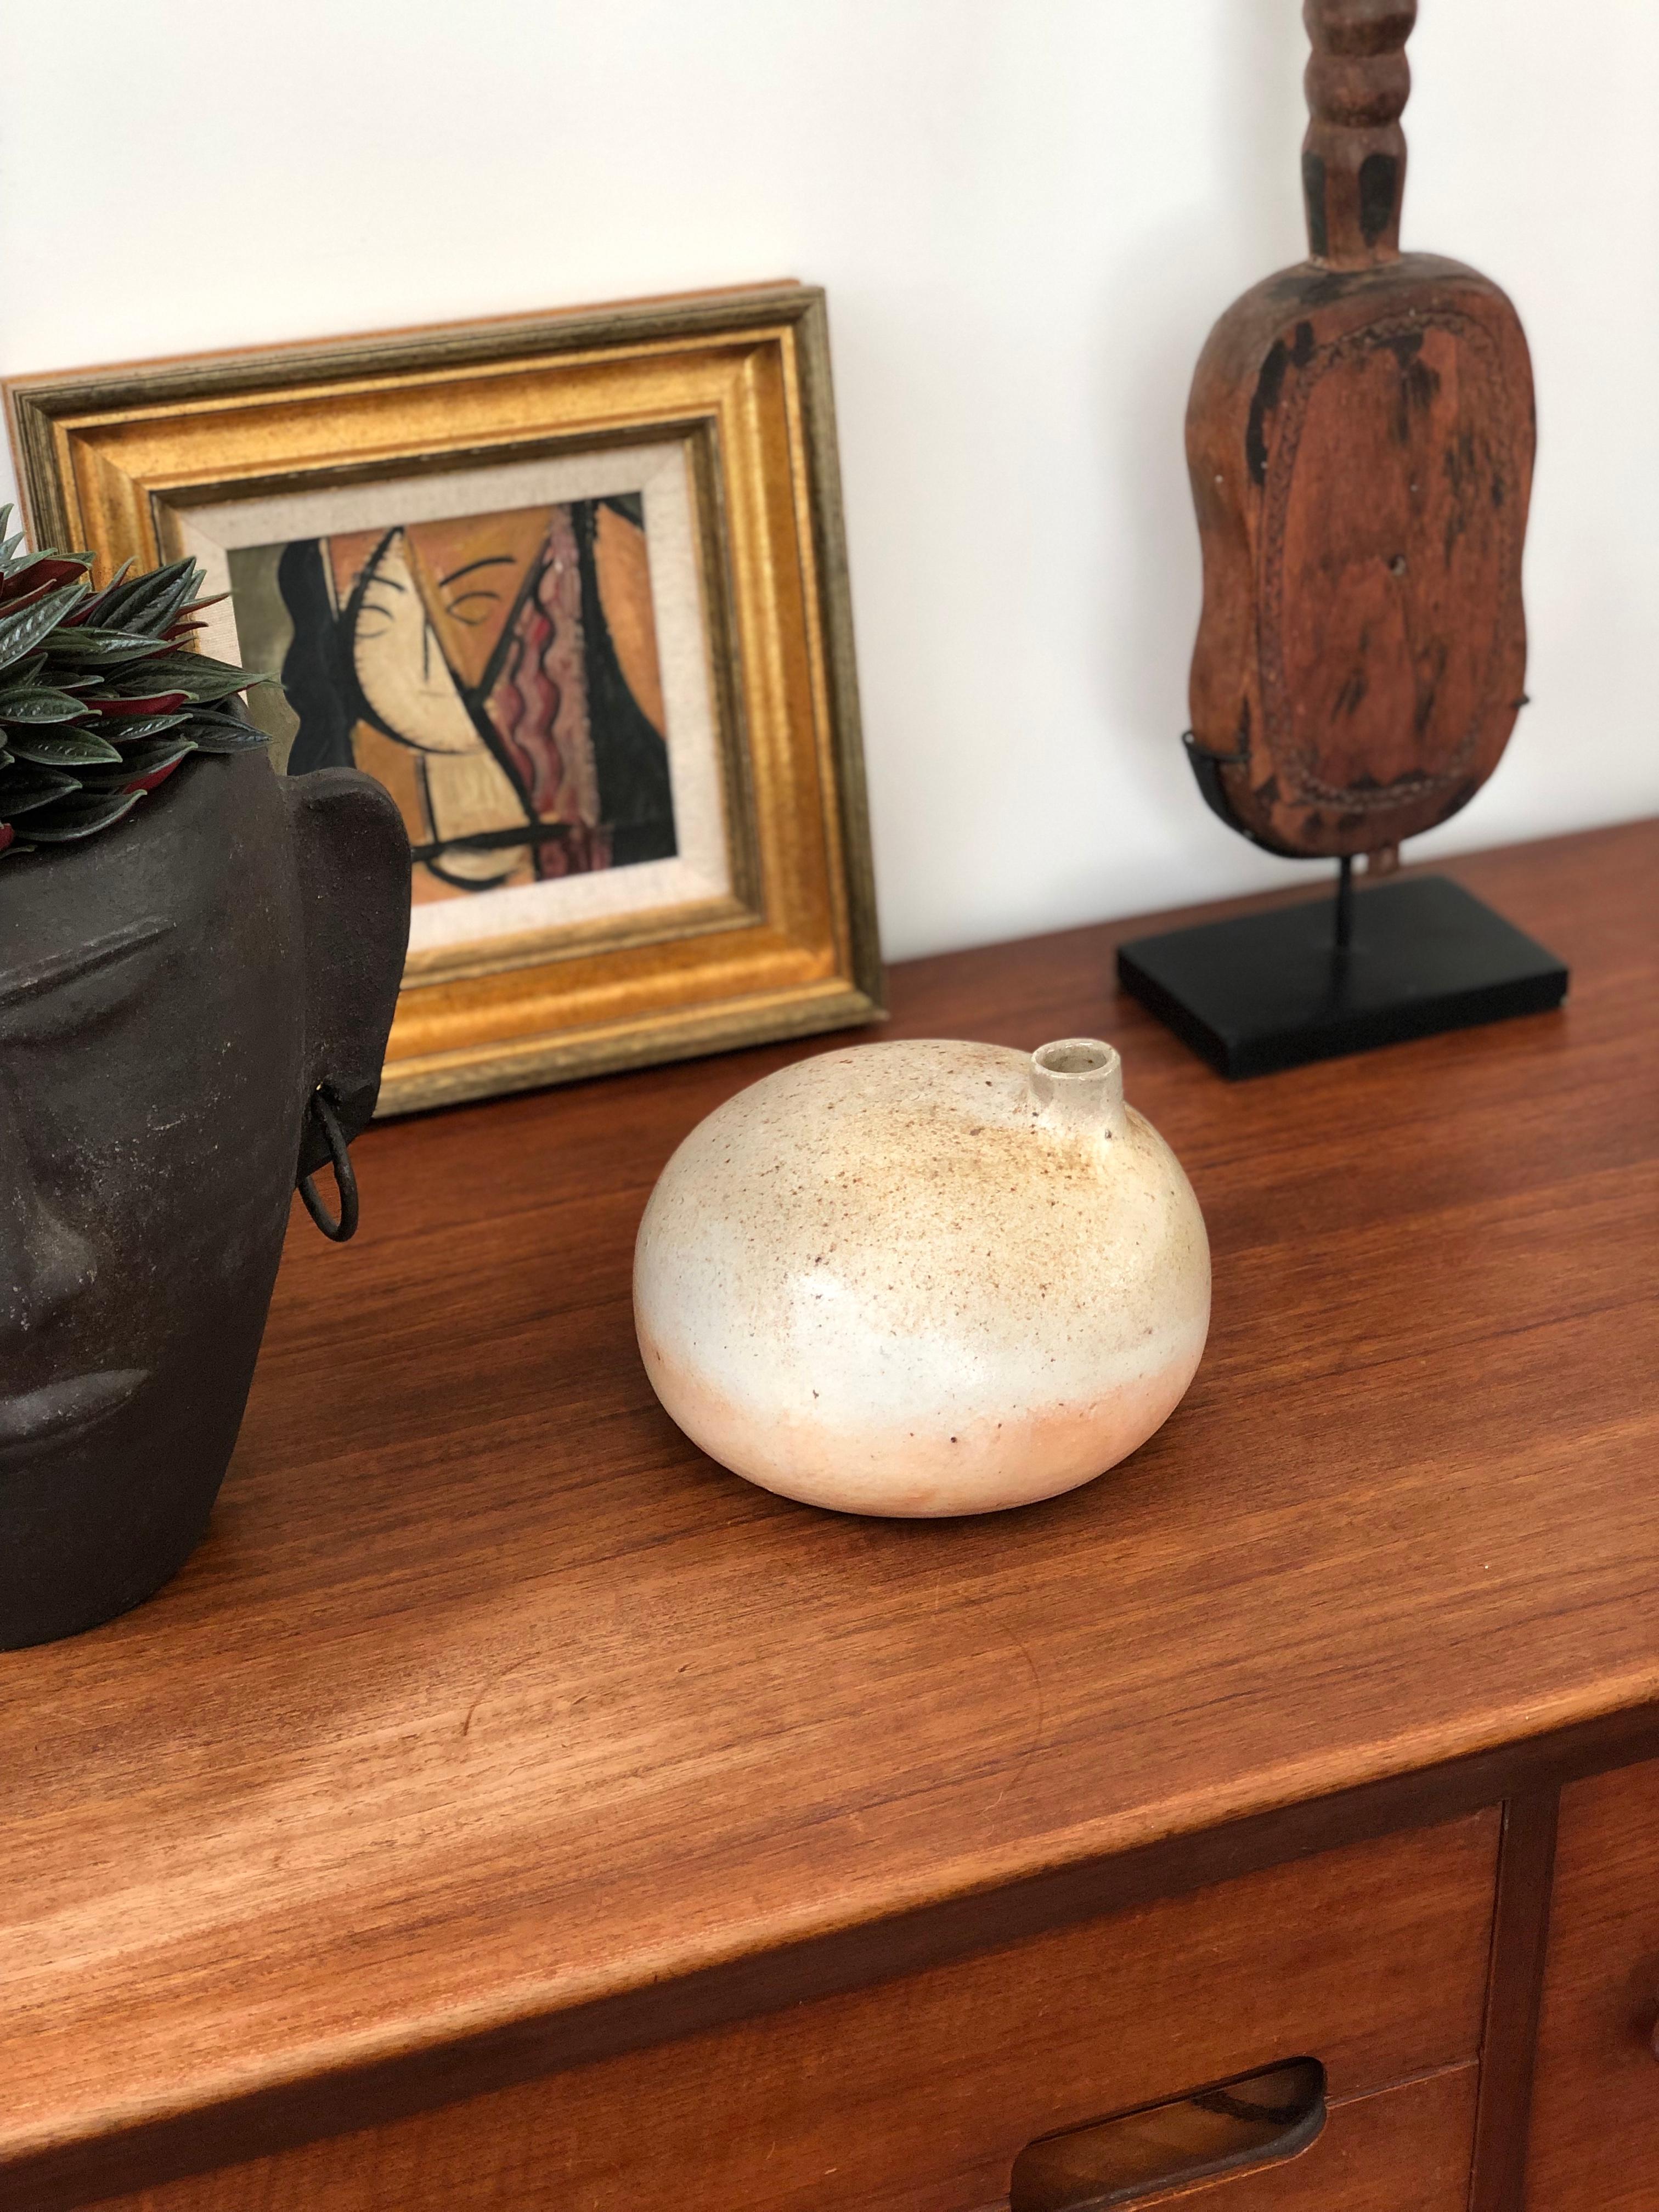 Decorative ceramic vase by Michel Lodereau, circa 1970s. The artist's trademark style is the creation of elegant pieces in sandstone with smooth glaze and subtle colouring. This piece has sensuous curves with a simple spout reminding one of a bird